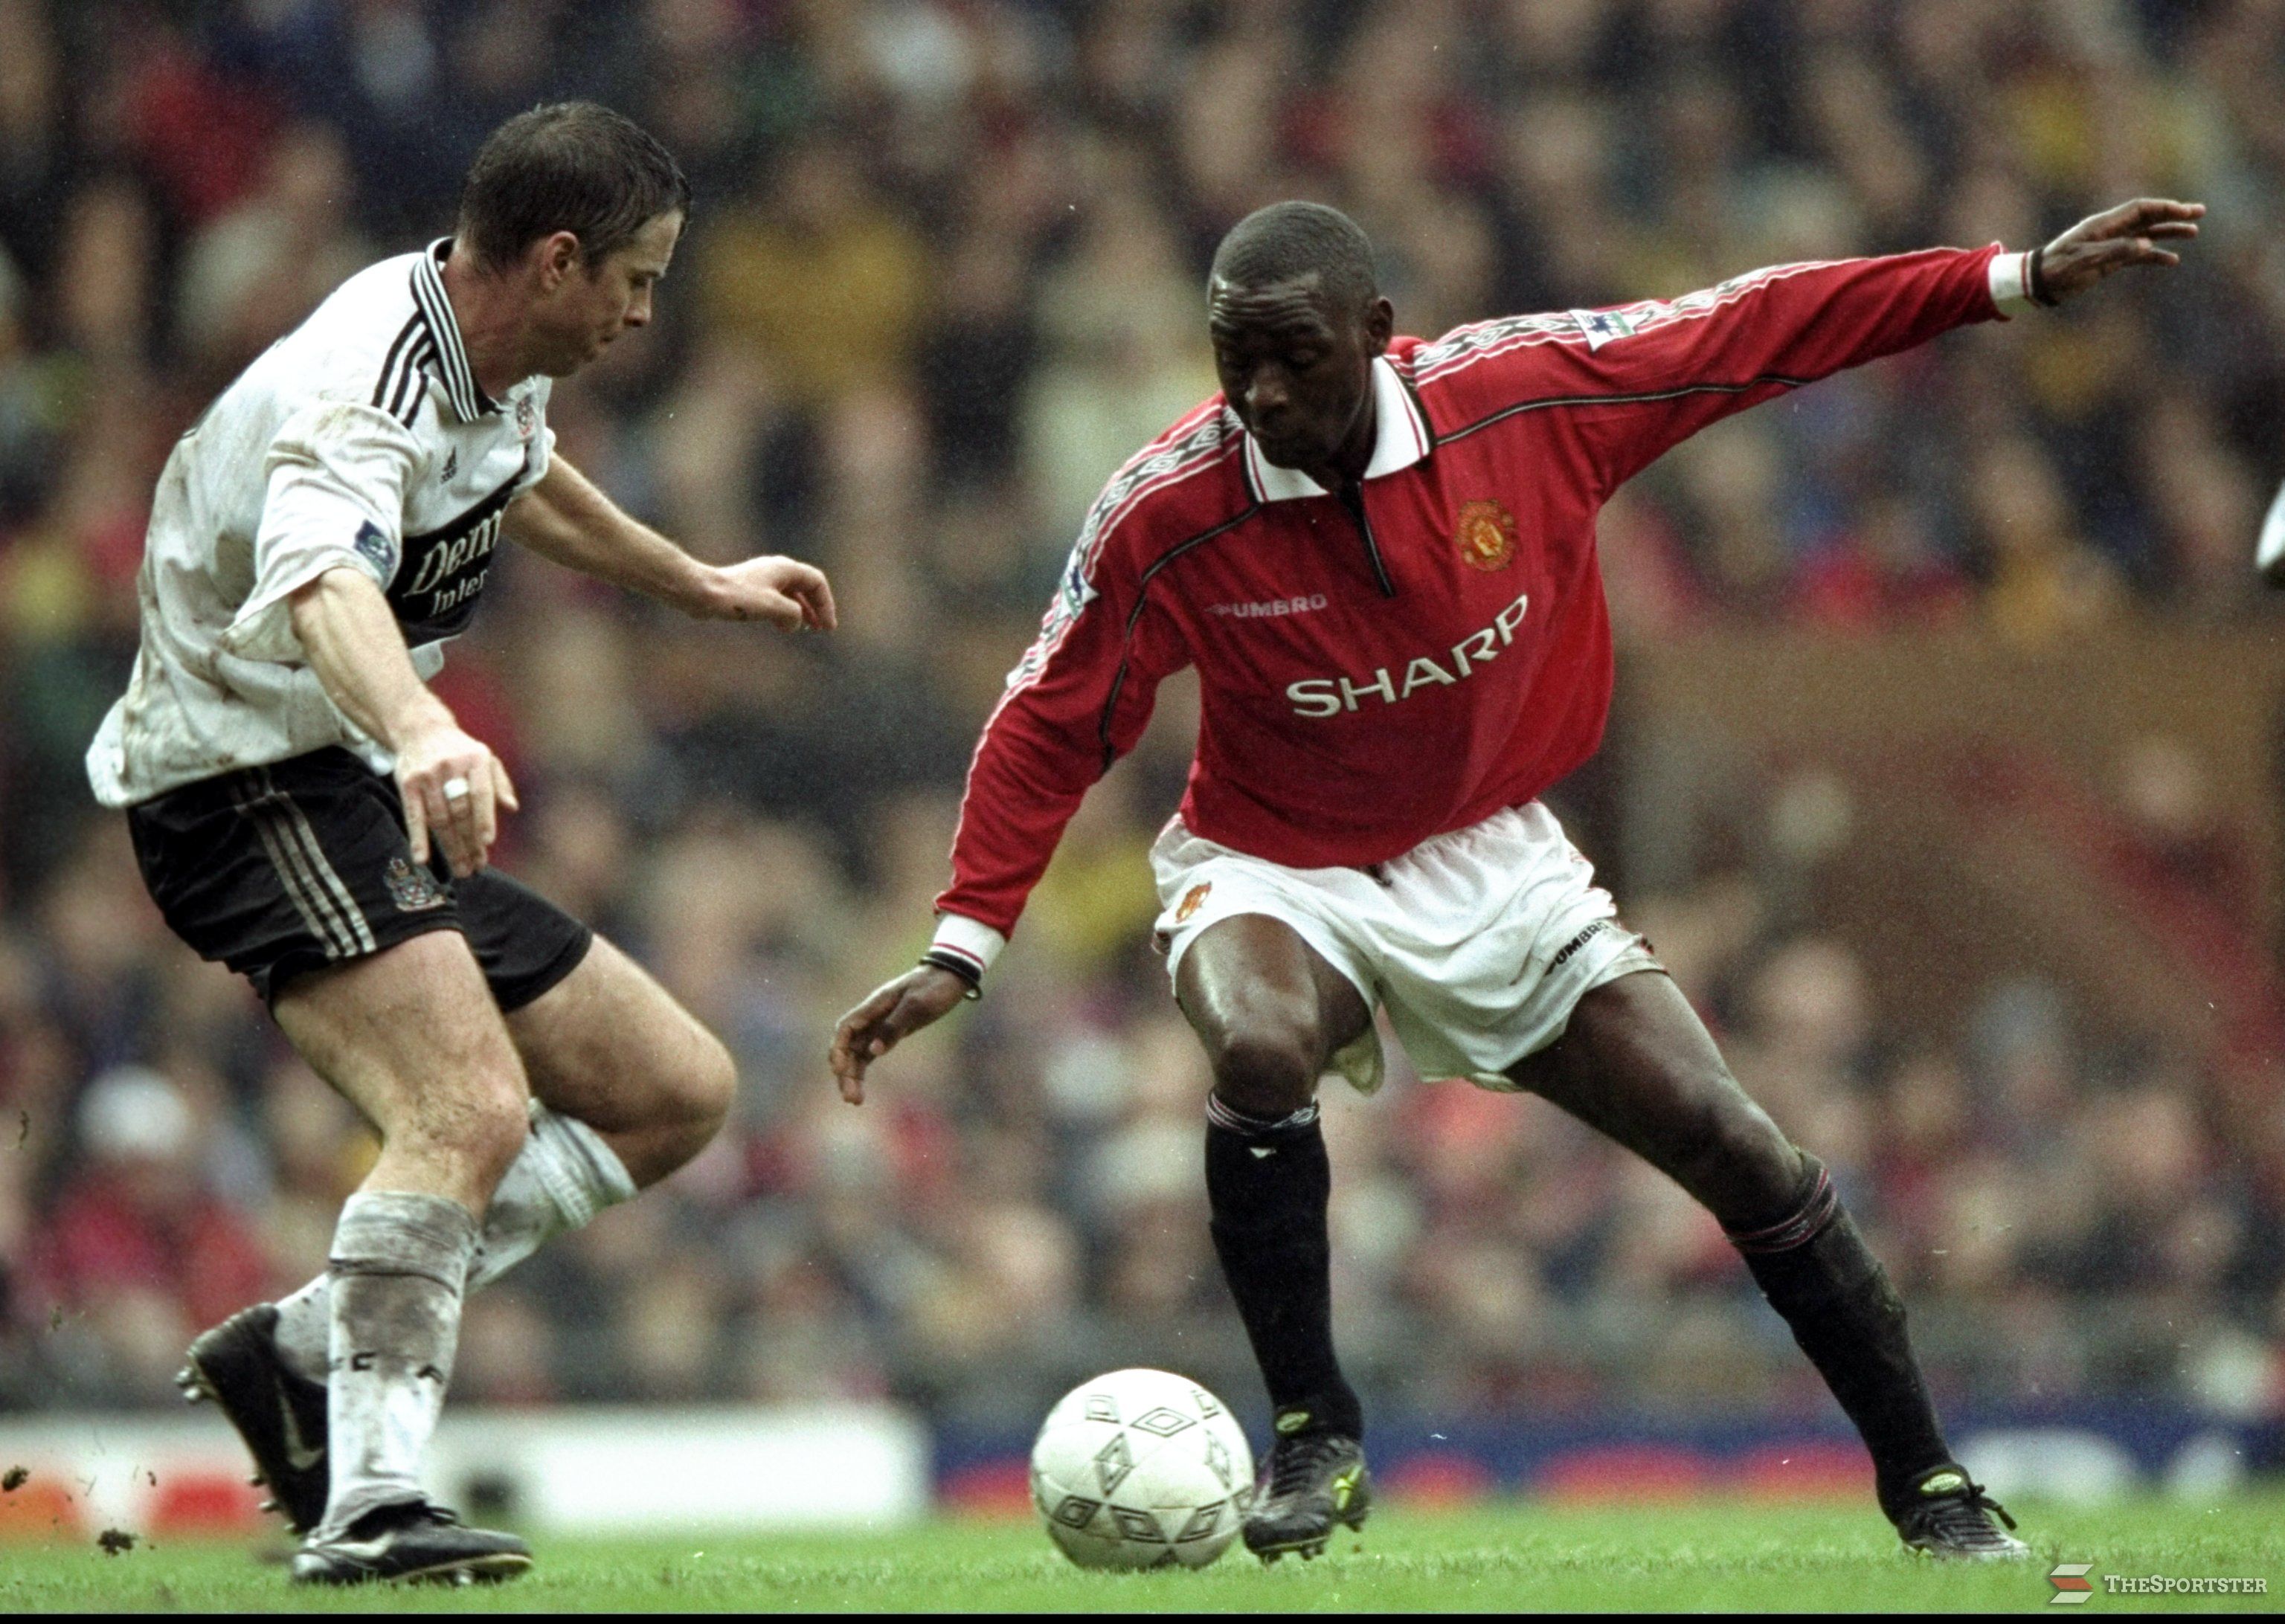 14 Feb 1999: Andy Cole of Manchester United in action during the AXA FA Cup 5th Round match against Fulham played at Old Trafford in Manchester, England. The match finished in a 1-0 win for Manchester United \ Mandatory Credit: Shaun Botterill /Allsport